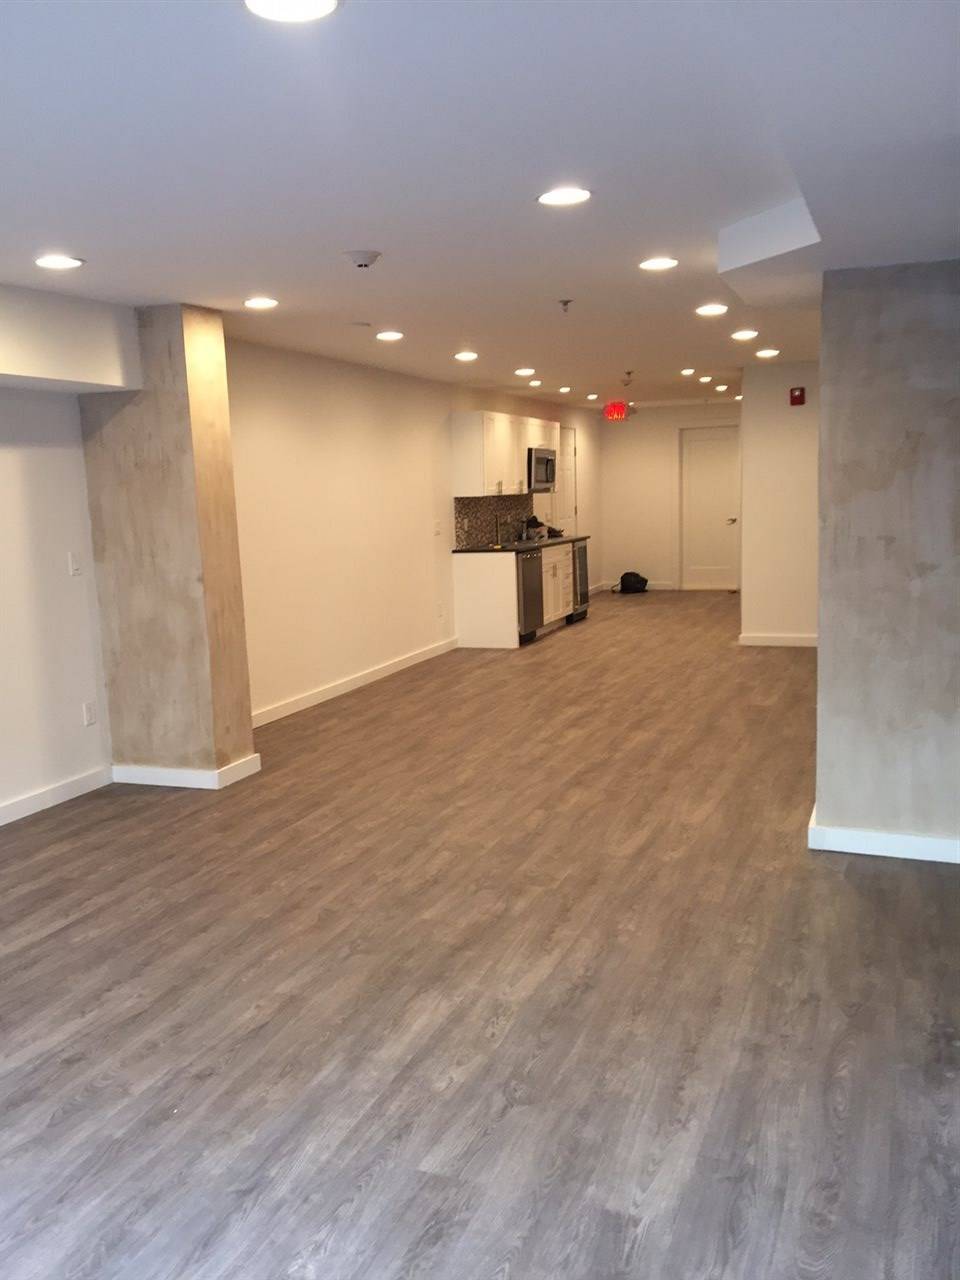 BEAUTIFUL STUDIO SPACE PERFECT FOR YOGA - Commercial Hoboken New Jersey